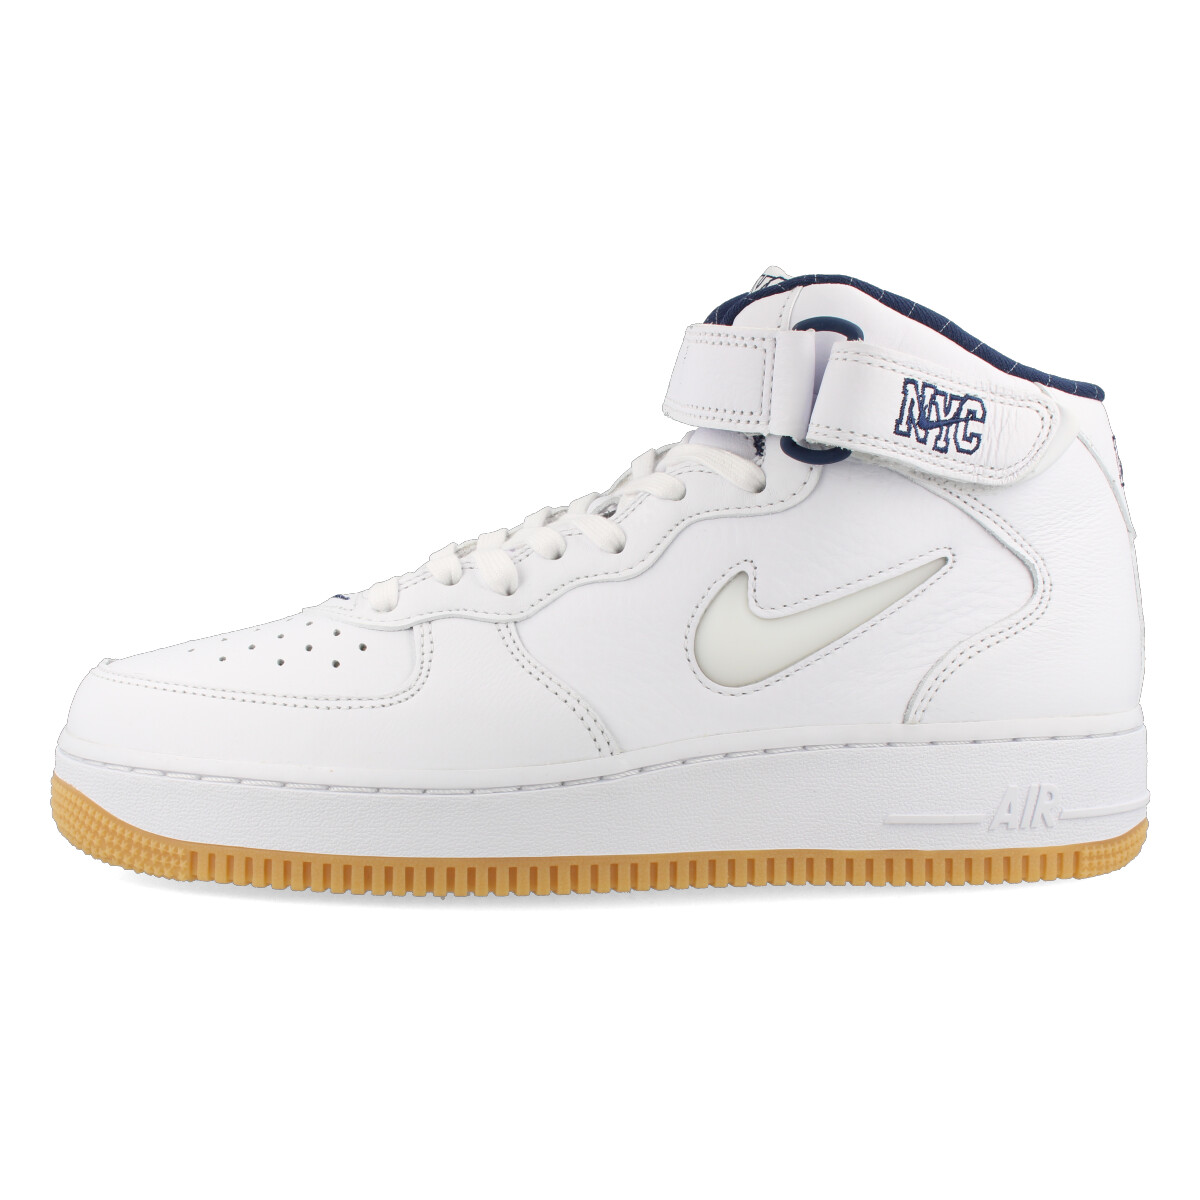 NIKE AIR FORCE 1 MID QS 【NYC】 ナイキ エア フォース 1 ミッド QS WHITE/WHITE/MIDNIGHT  NAVY/GUM YELLOW dh5622-100 | SELECT SHOP LOWTEX